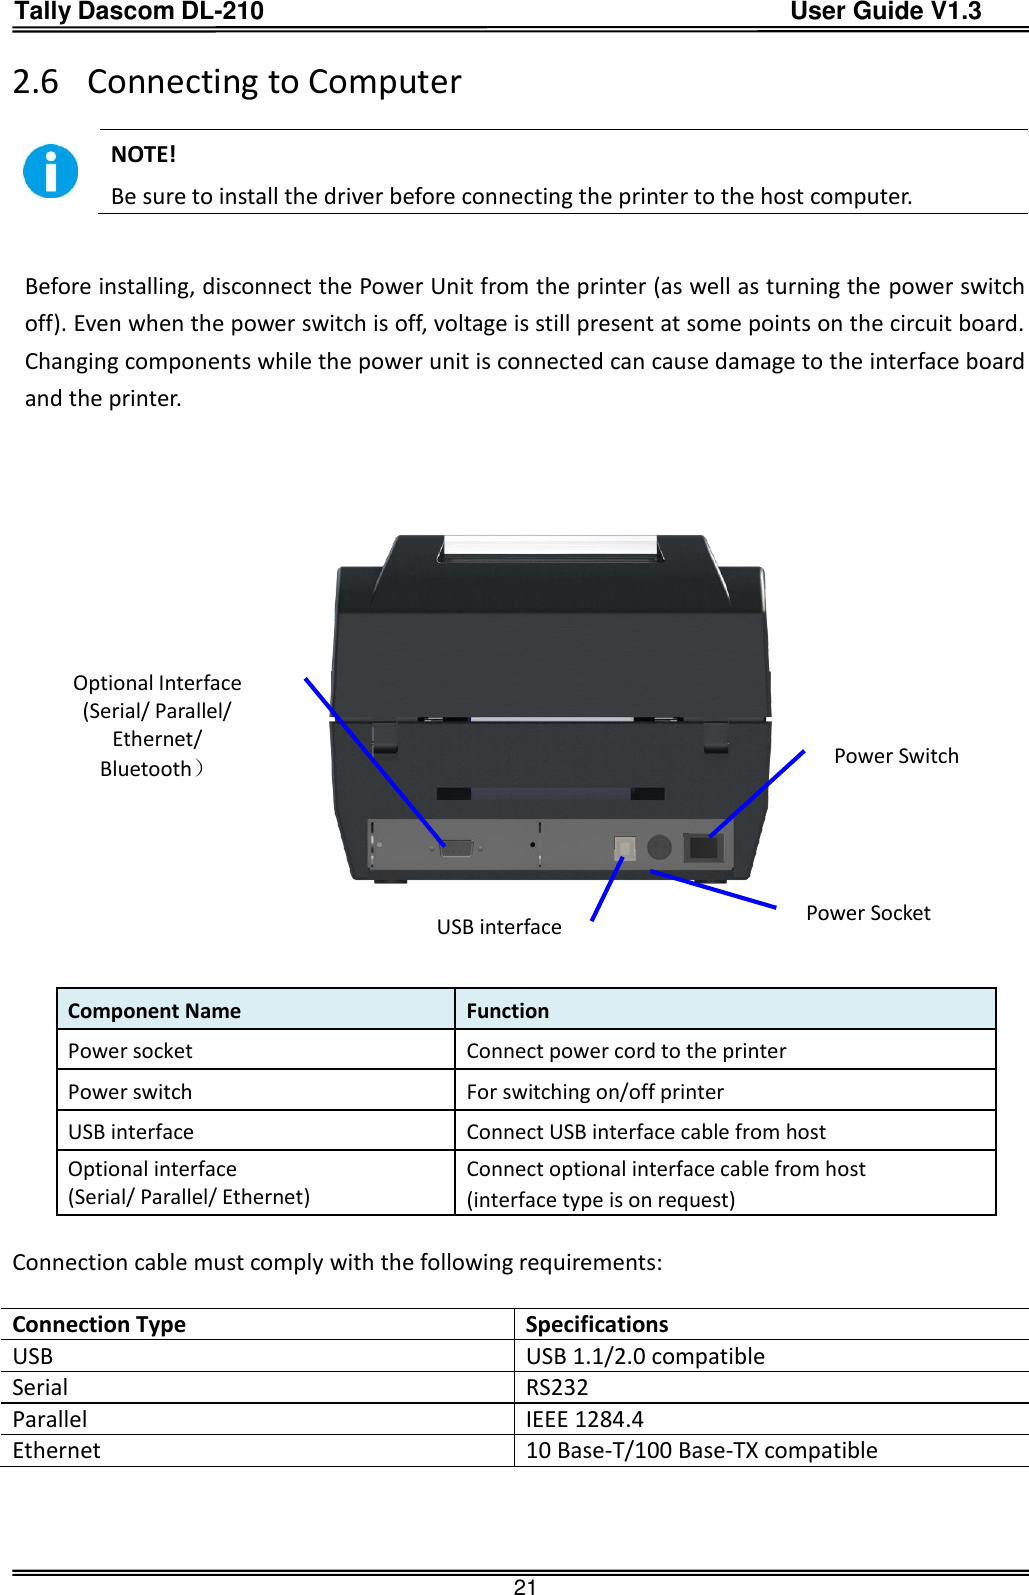 Tally Dascom DL-210                                          User Guide V1.3  21 2.6 Connecting to Computer   NOTE!   Be sure to install the driver before connecting the printer to the host computer.   Before installing, disconnect the Power Unit from the printer (as well as turning the power switch off). Even when the power switch is off, voltage is still present at some points on the circuit board. Changing components while the power unit is connected can cause damage to the interface board and the printer.        Component Name Function Power socket Connect power cord to the printer Power switch For switching on/off printer USB interface Connect USB interface cable from host Optional interface (Serial/ Parallel/ Ethernet) Connect optional interface cable from host (interface type is on request)  Connection cable must comply with the following requirements:  Connection Type Specifications USB USB 1.1/2.0 compatible Serial RS232 Parallel IEEE 1284.4 Ethernet 10 Base-T/100 Base-TX compatible   Power Switch Optional Interface (Serial/ Parallel/ Ethernet/ Bluetooth） USB interface Power Socket 